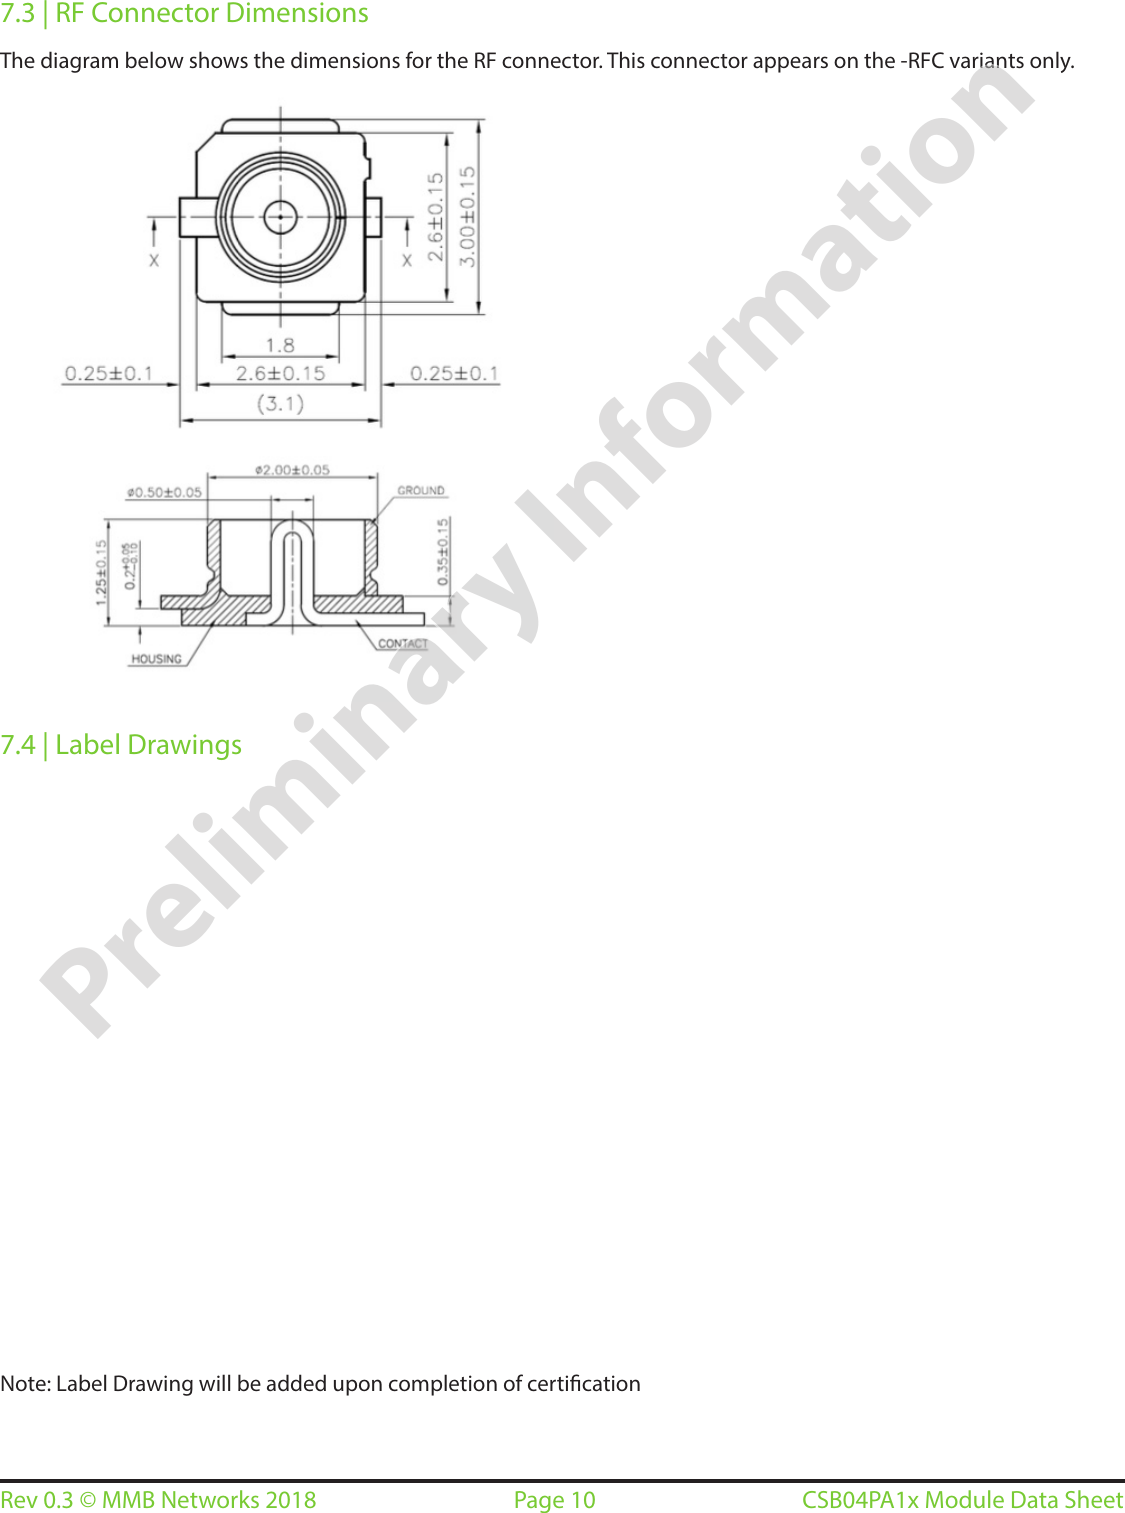 Page 10Rev 0.3 © MMB Networks 2018 CSB04PA1x Module Data Sheet7.3 | RF Connector DimensionsThe diagram below shows the dimensions for the RF connector. This connector appears on the -RFC variants only.7.4 | Label DrawingsNote: Label Drawing will be added upon completion of certicationPreliminary Information